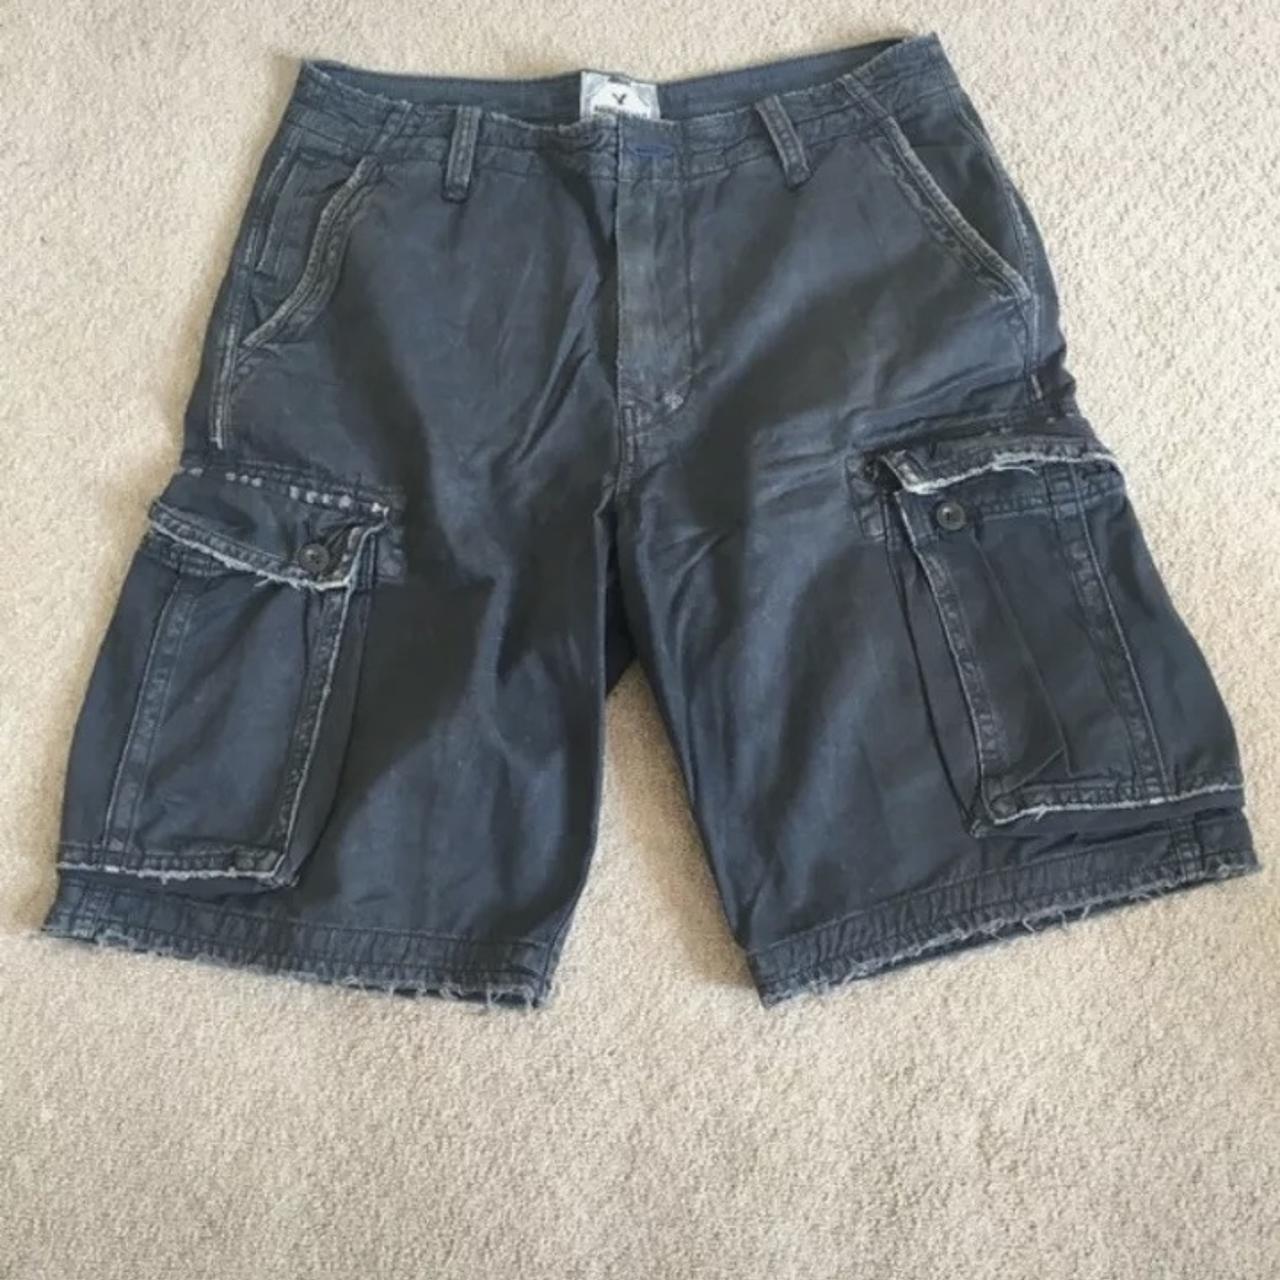 American Eagle Outfitters Men's Shorts | Depop